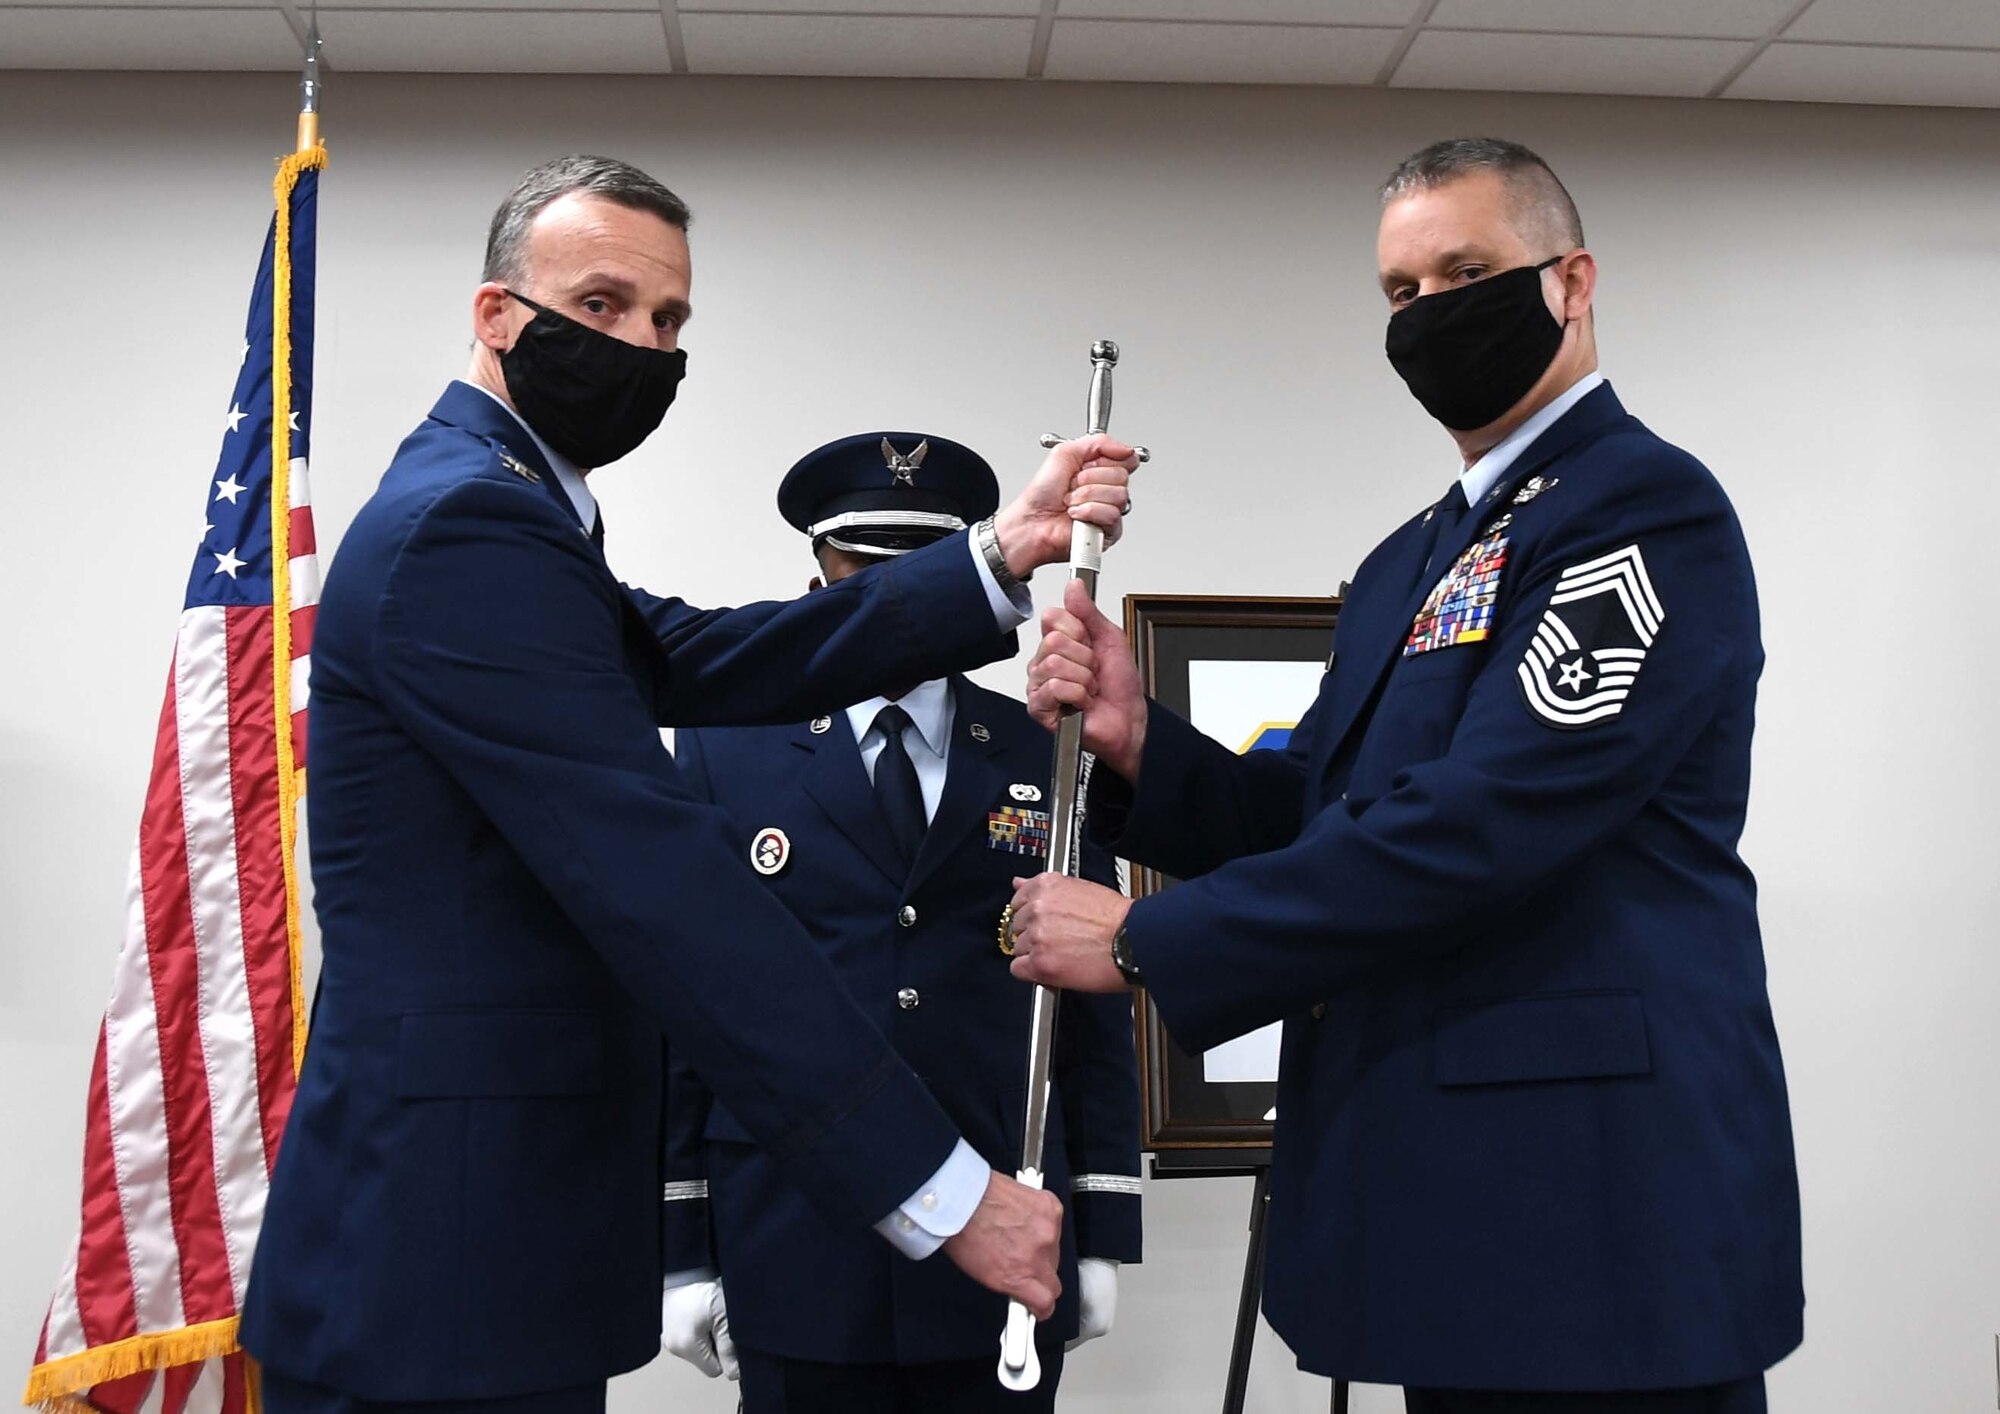 U.S. Air Force 145th Airlift Wing (AW) Command Chief Master Sgt. William R. Harper, Jr. ceremoniously accepts a sword as symbolism of taking over authority as the new Command Chief of the 145th AW during a Change of Authority Ceremony held at the North Carolina Air National Guard Base, Charlotte Douglas International Airport, March 6, 2021. CMSgt Susan A. Dietz, relinquishes authority of the 145th AW Command Chief position as CMSgt Harper, accepts authority.